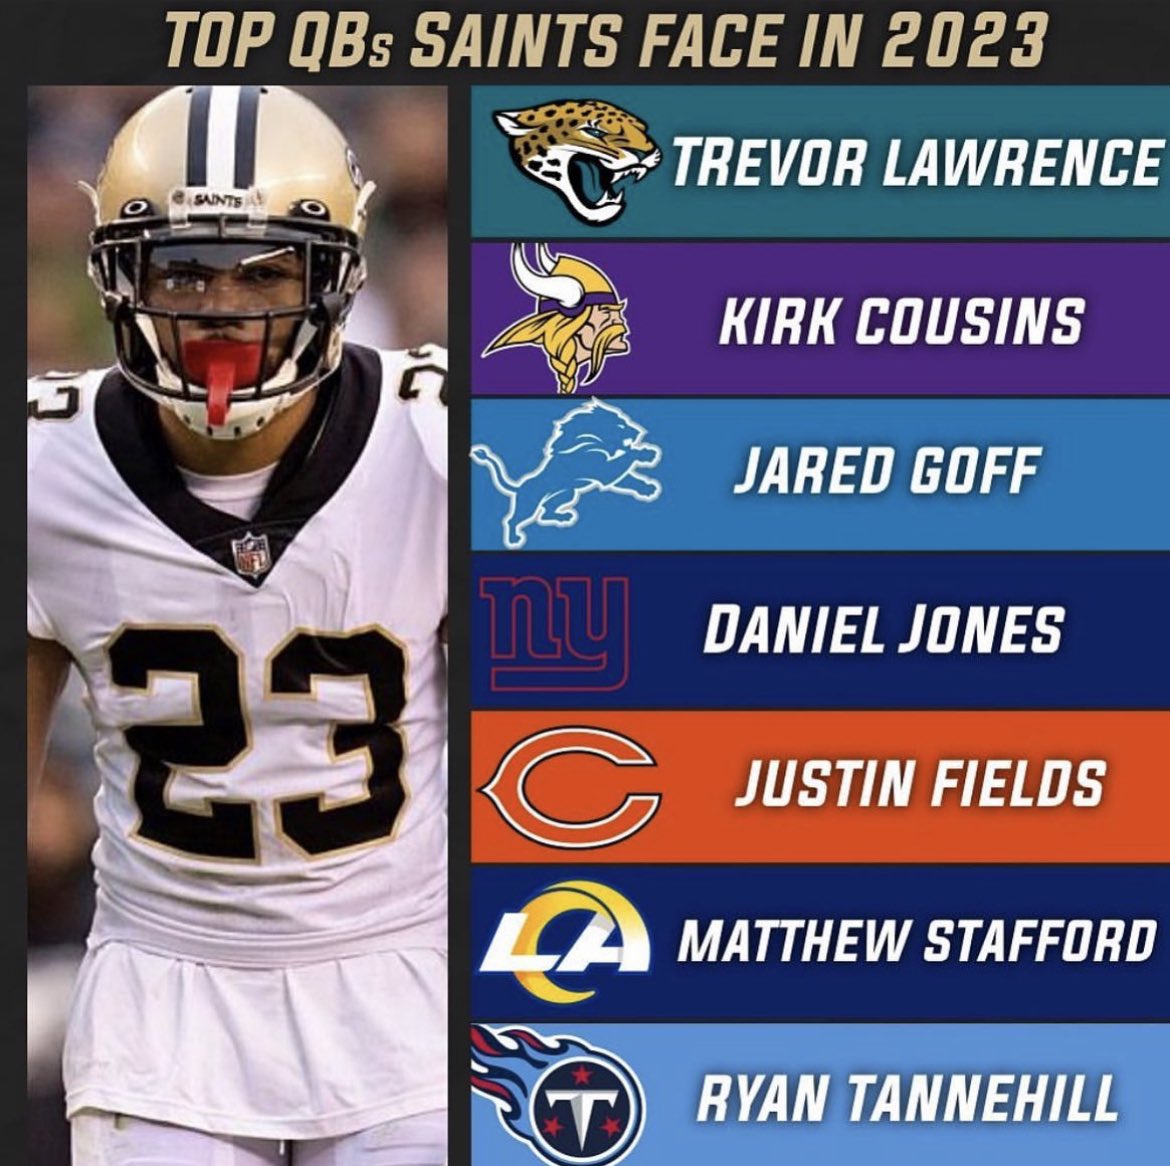 RT @WhoDatContent: The Saints defense is going to feast on these QBs this season https://t.co/BsvZxv5mCi